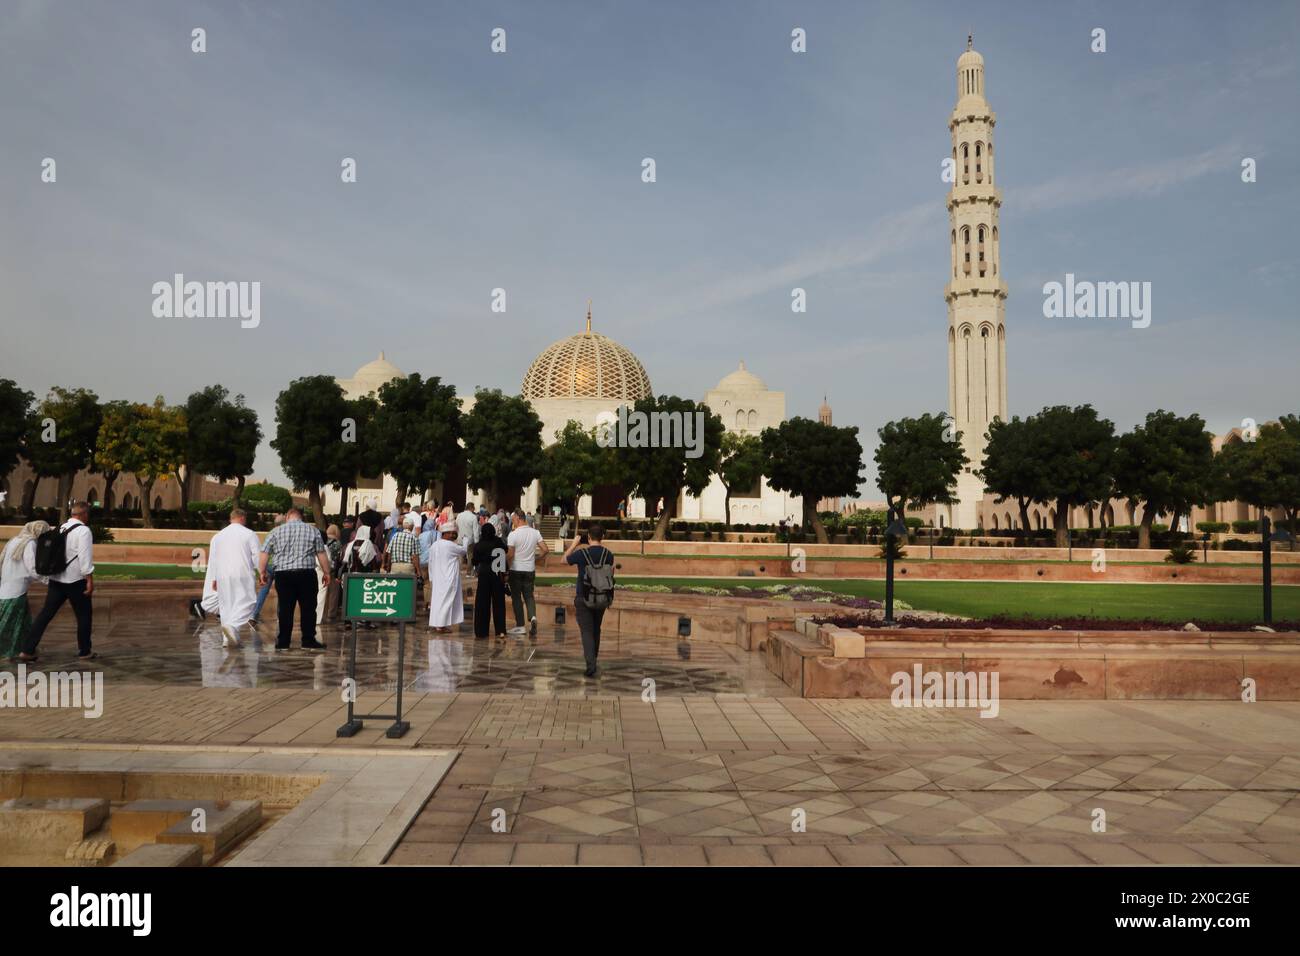 Sultan Qaboos Grand Mosque and Gardens  Muscat Oman Stock Photo